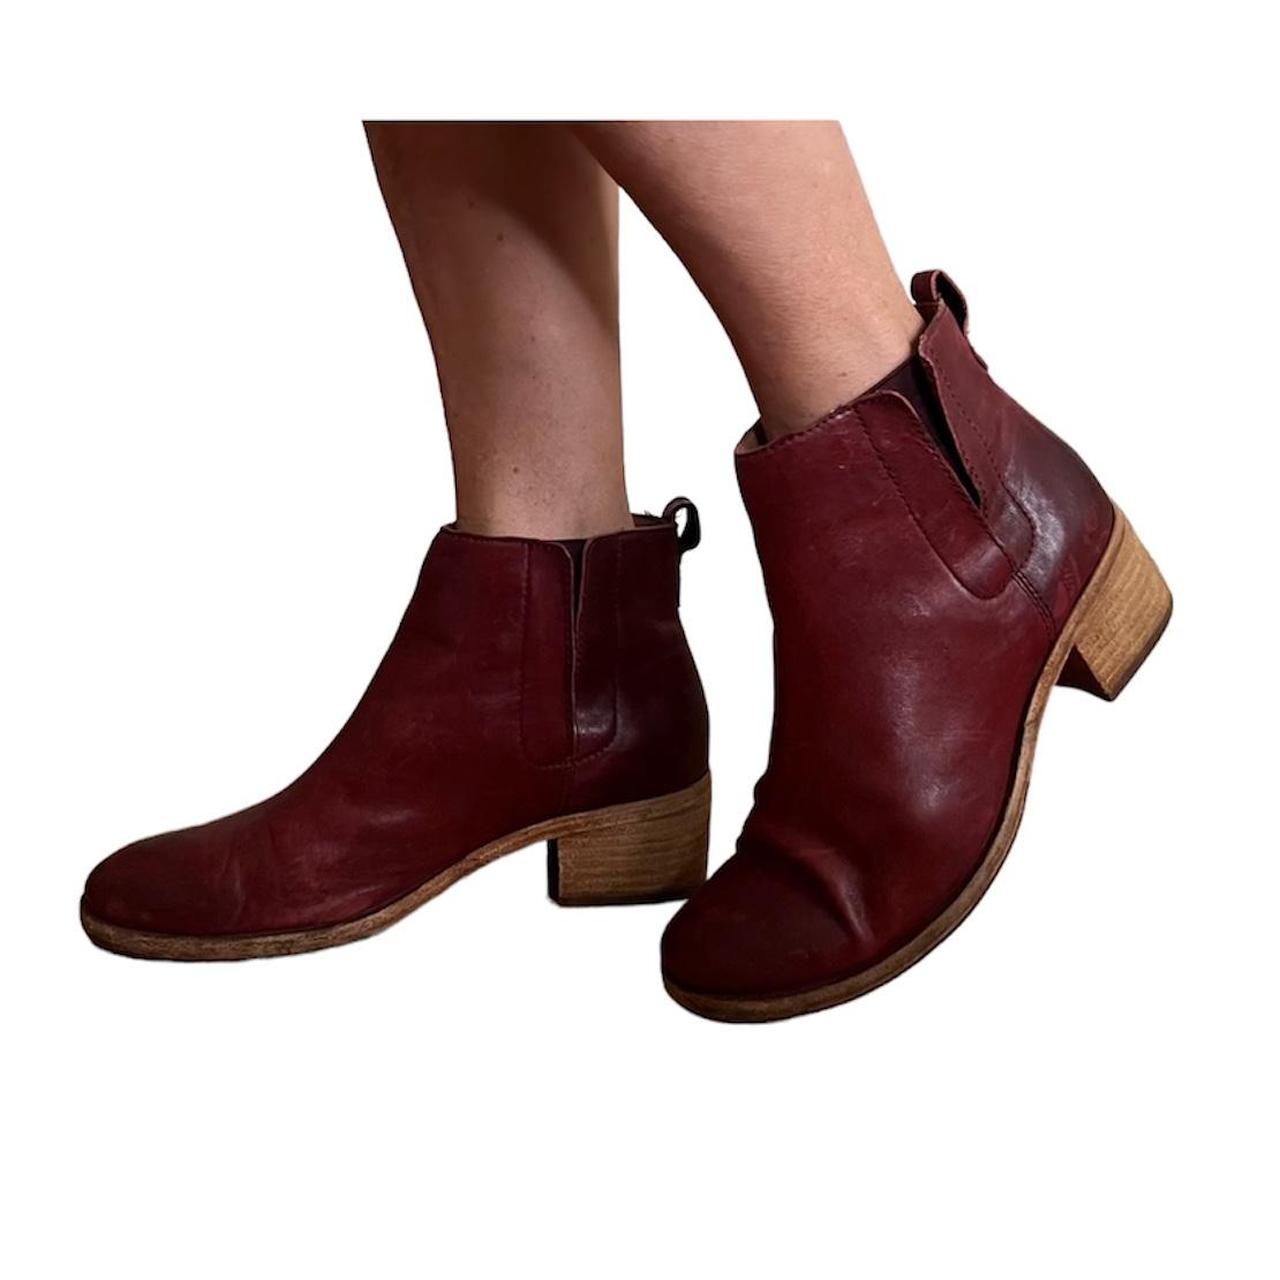 Korks Women's Burgundy and Brown Boots